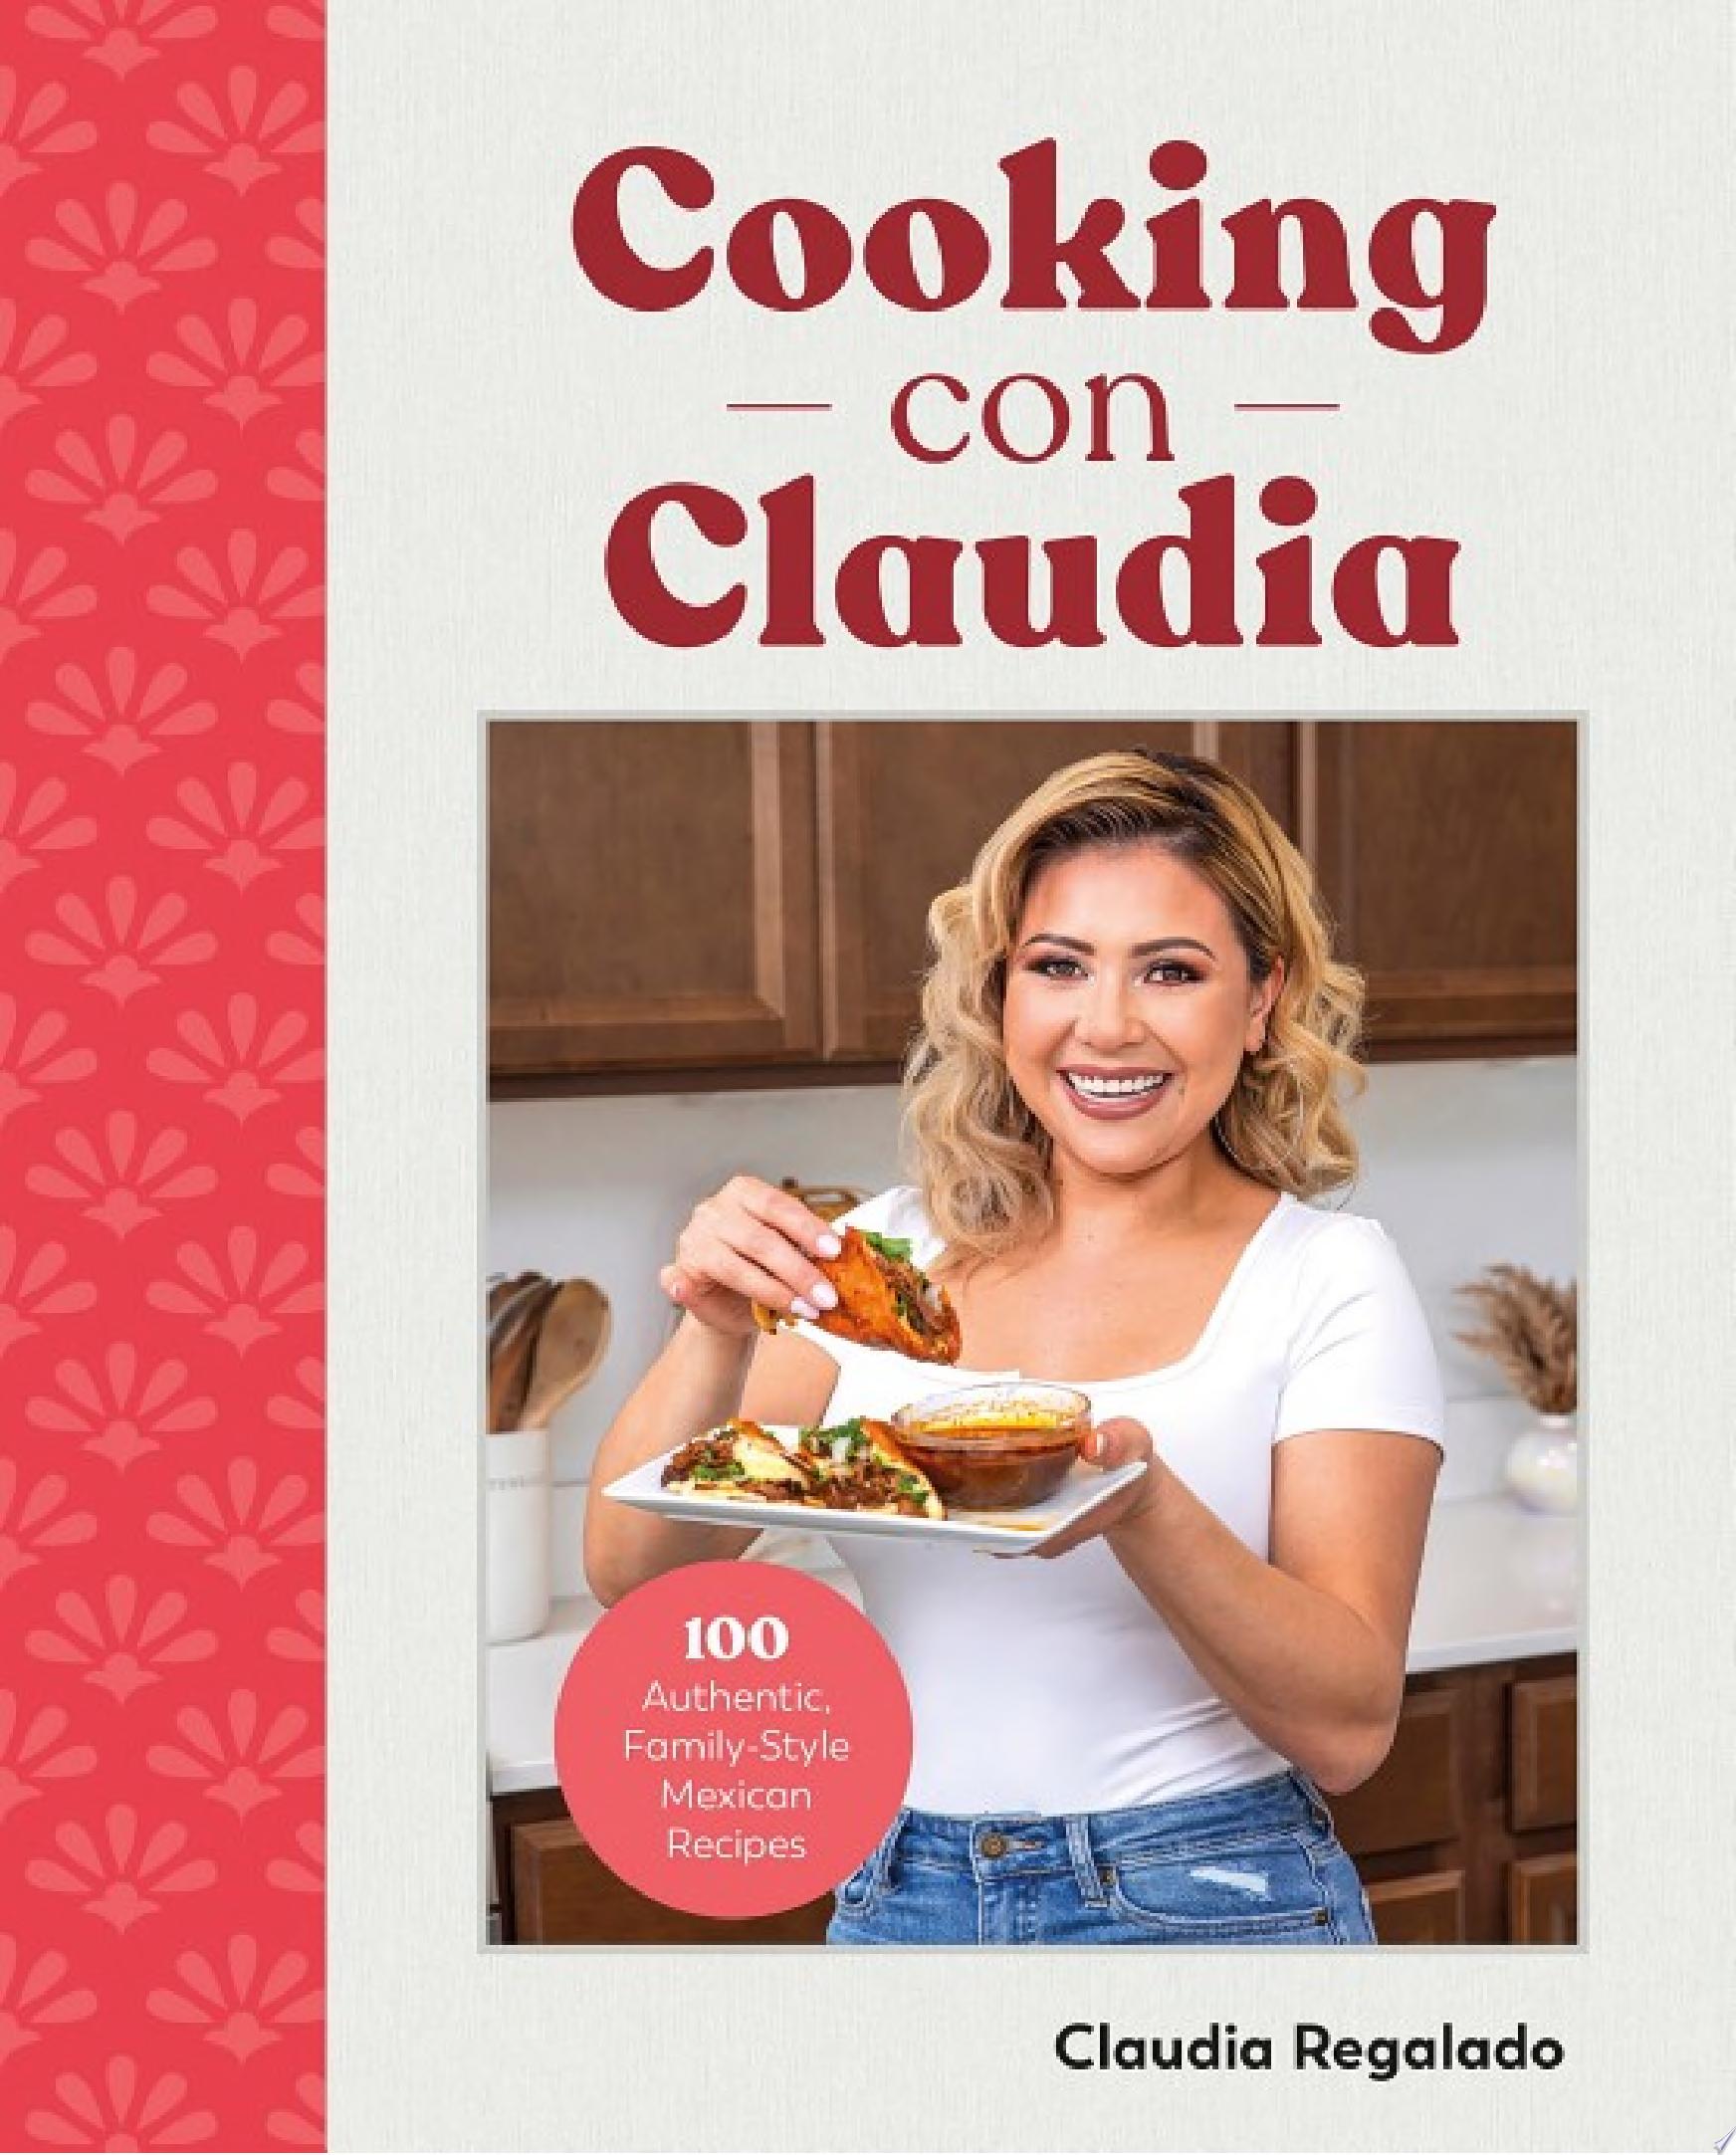 Image for "Cooking con Claudia"